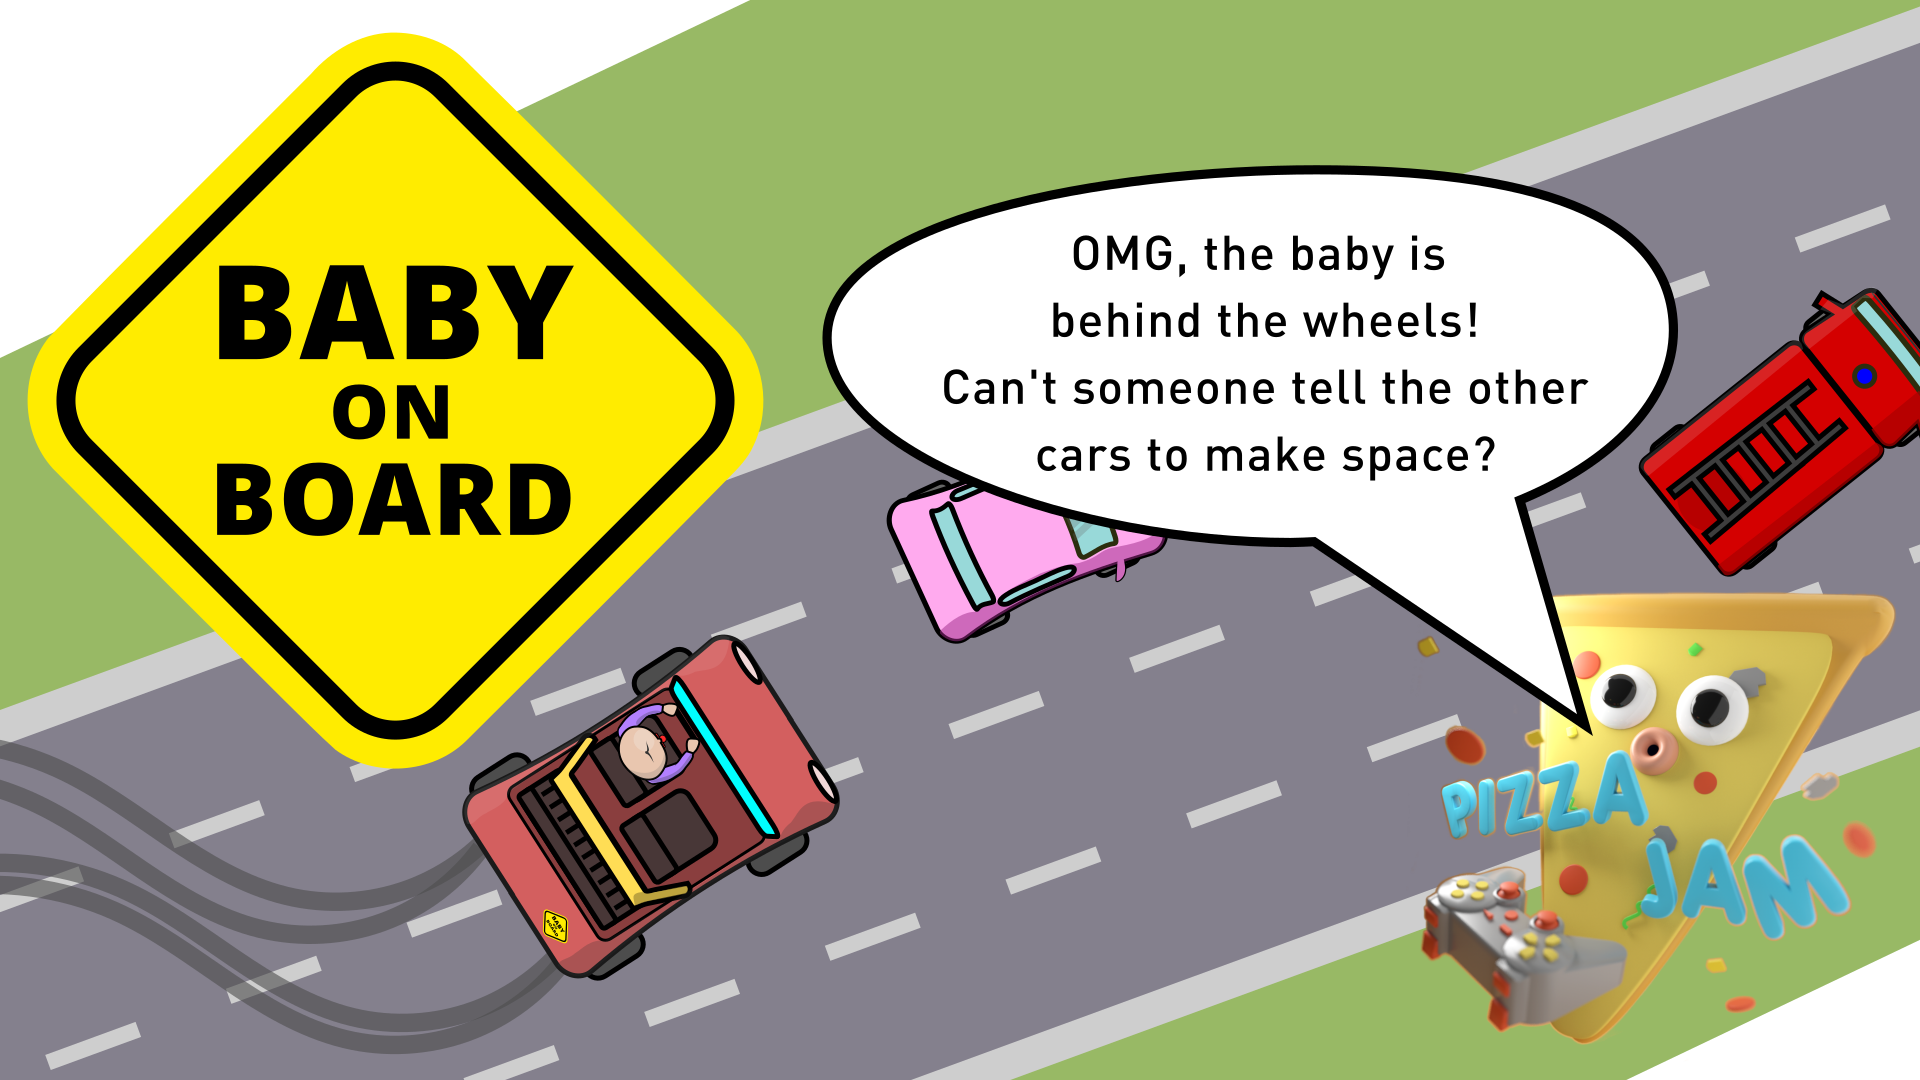 Baby on Board!